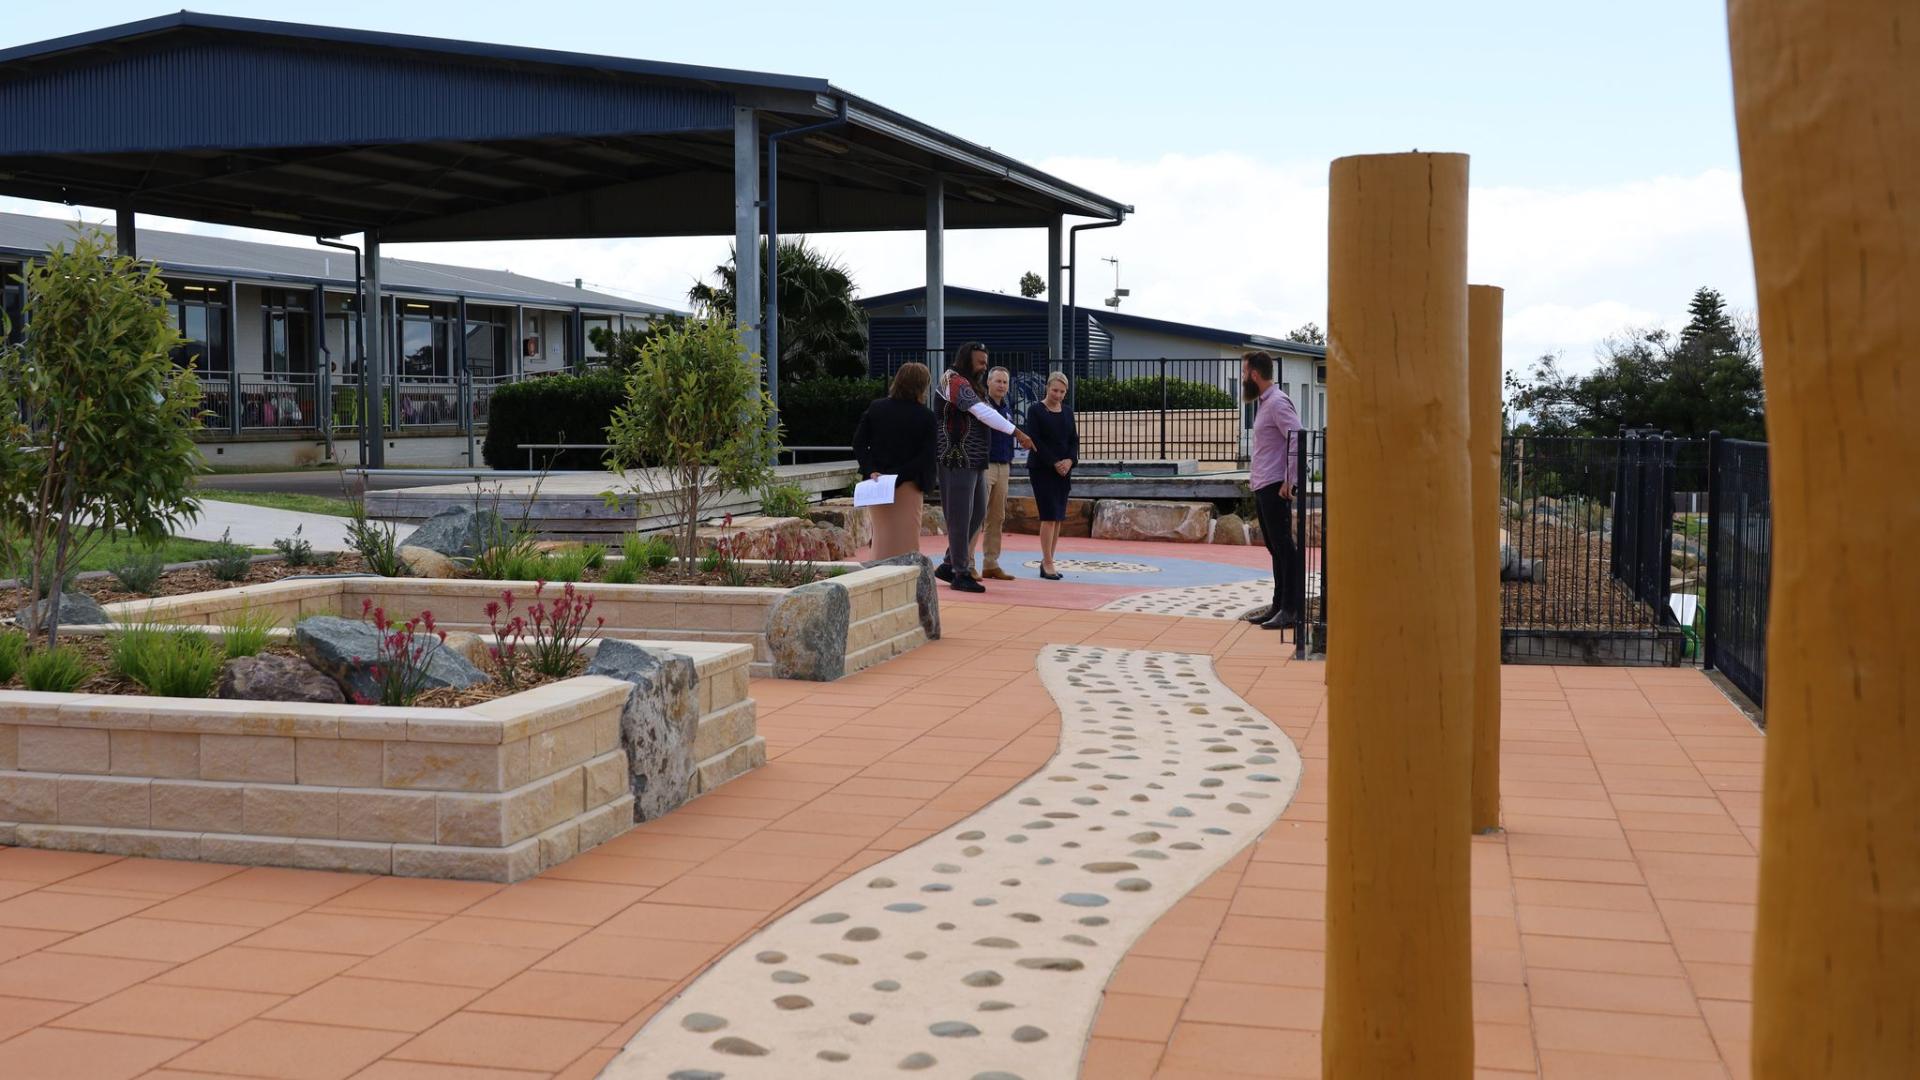 Paved open area with two wooden posts in foreground with garden beds protected by an aluminium awning on left hand side, with a concrete path in centre of image.